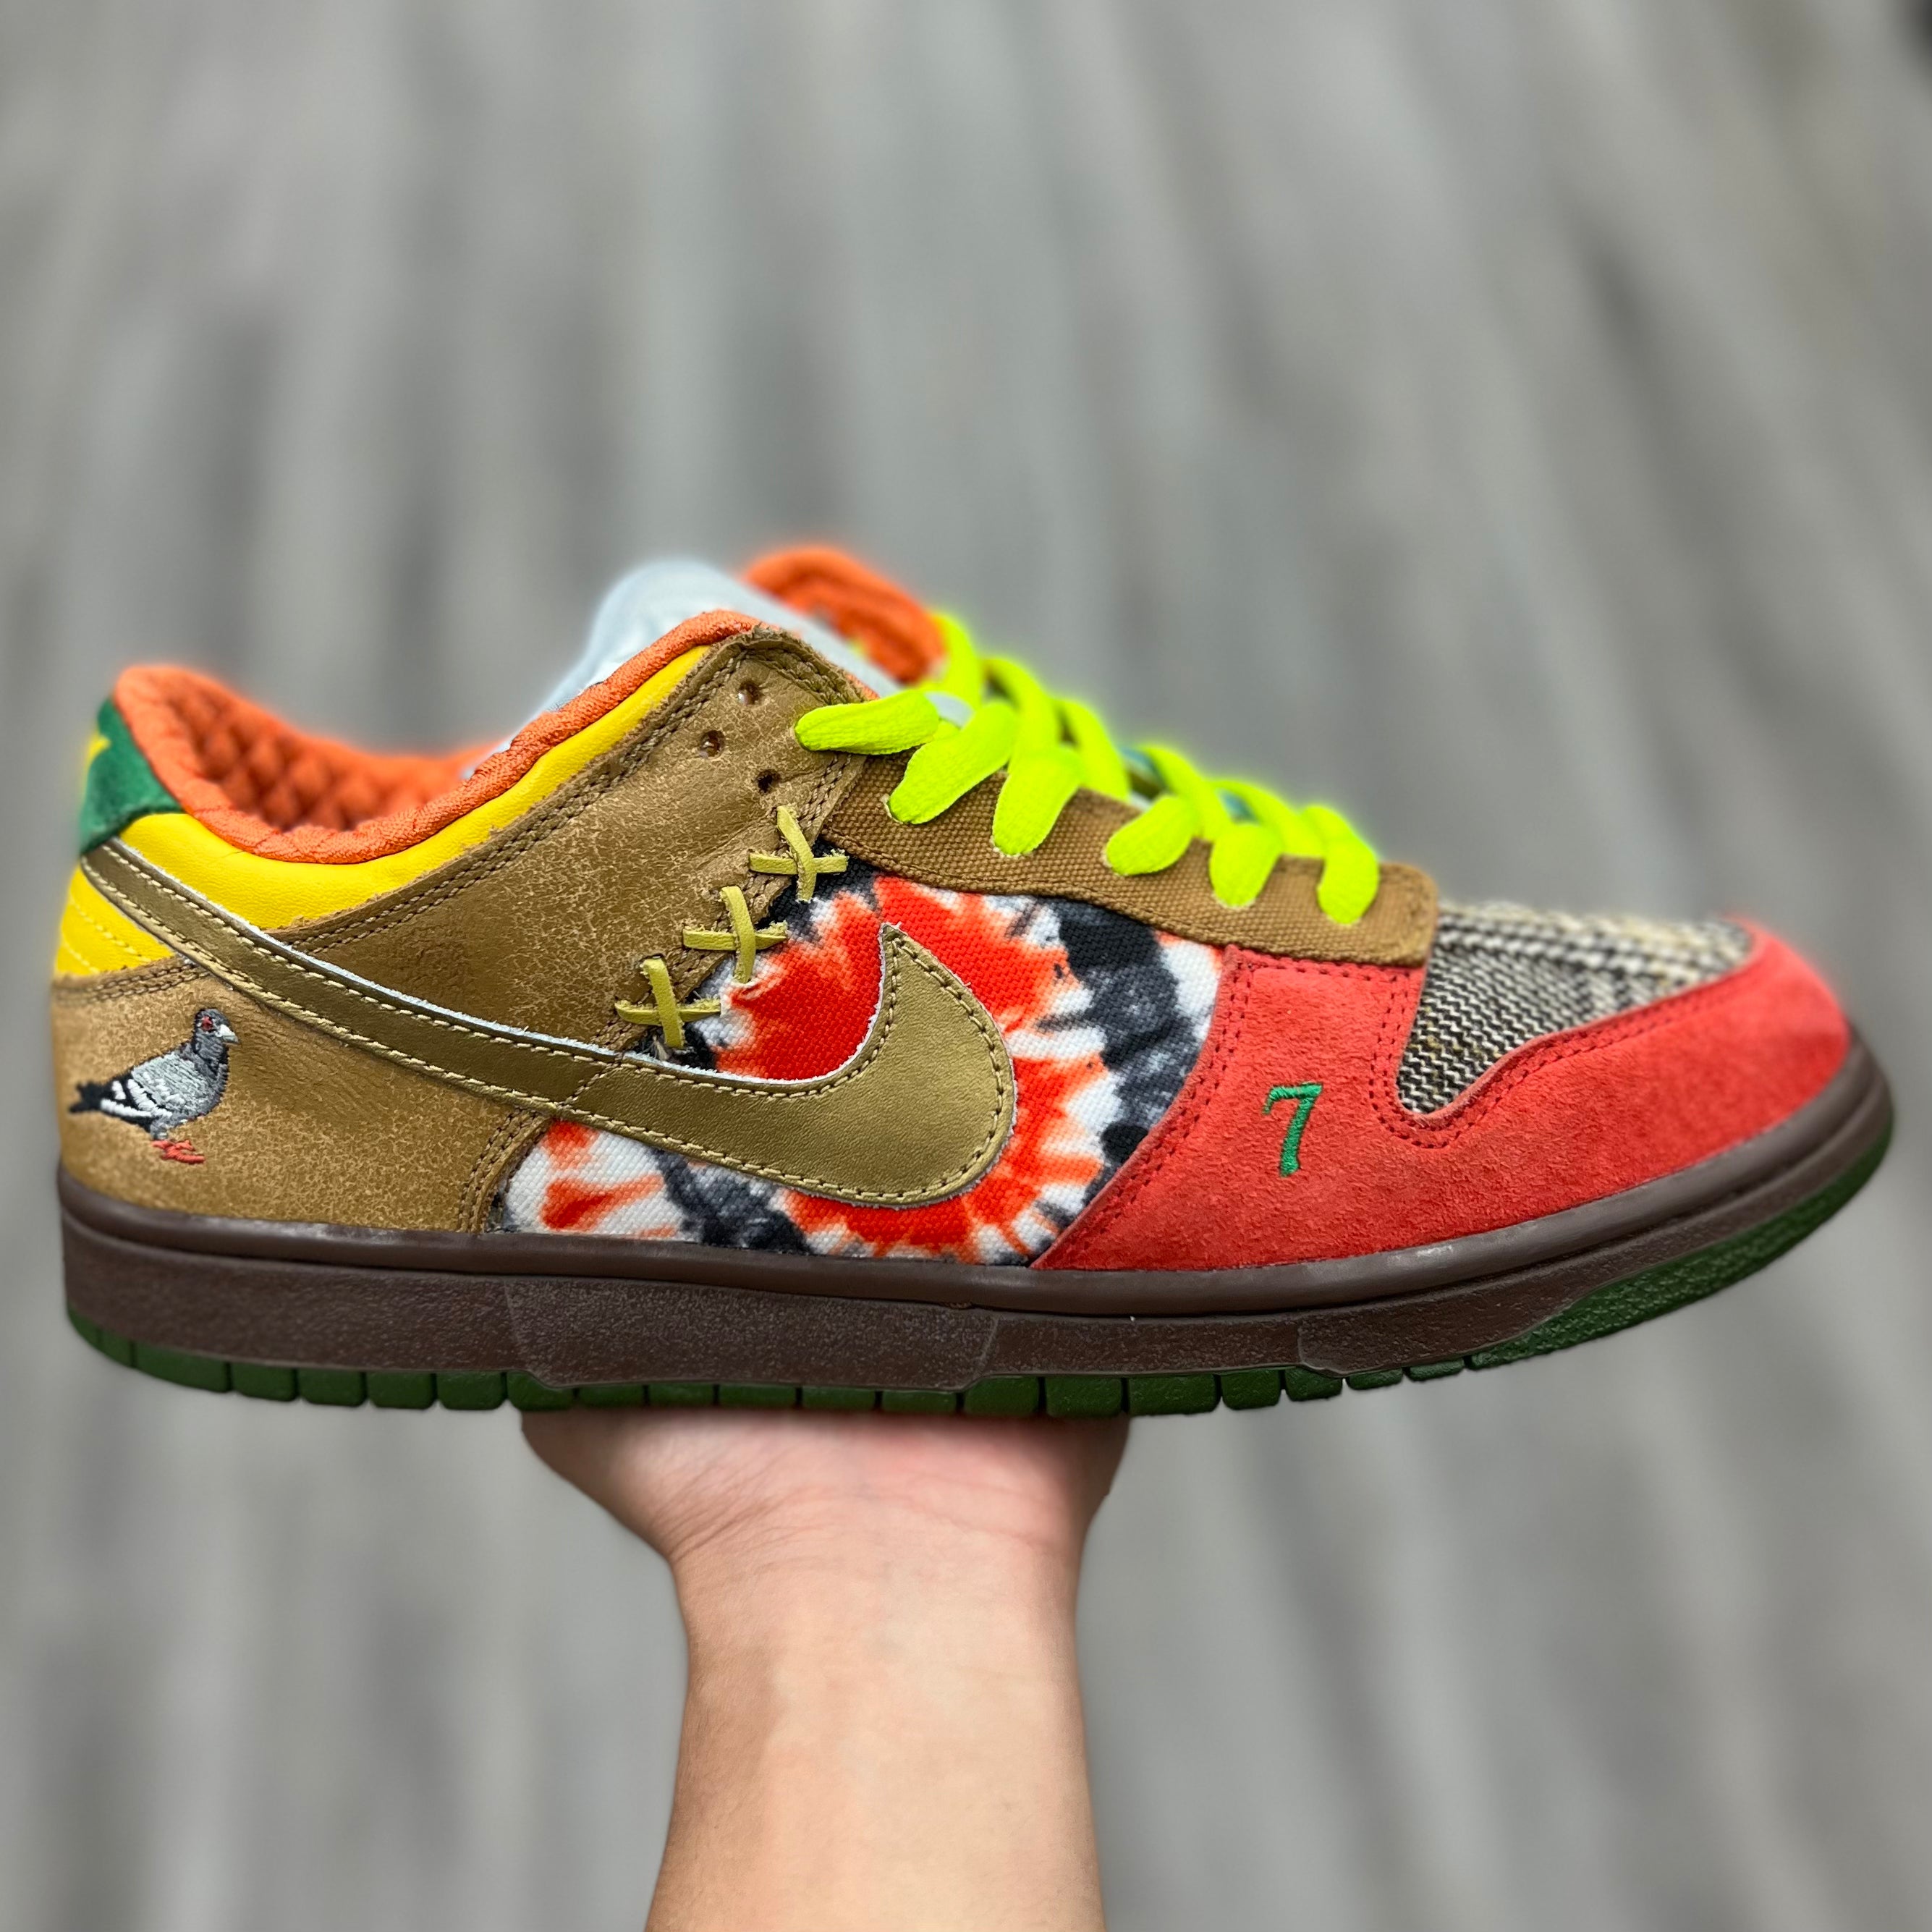 Nike Dunk SB Low " What The Dunk"